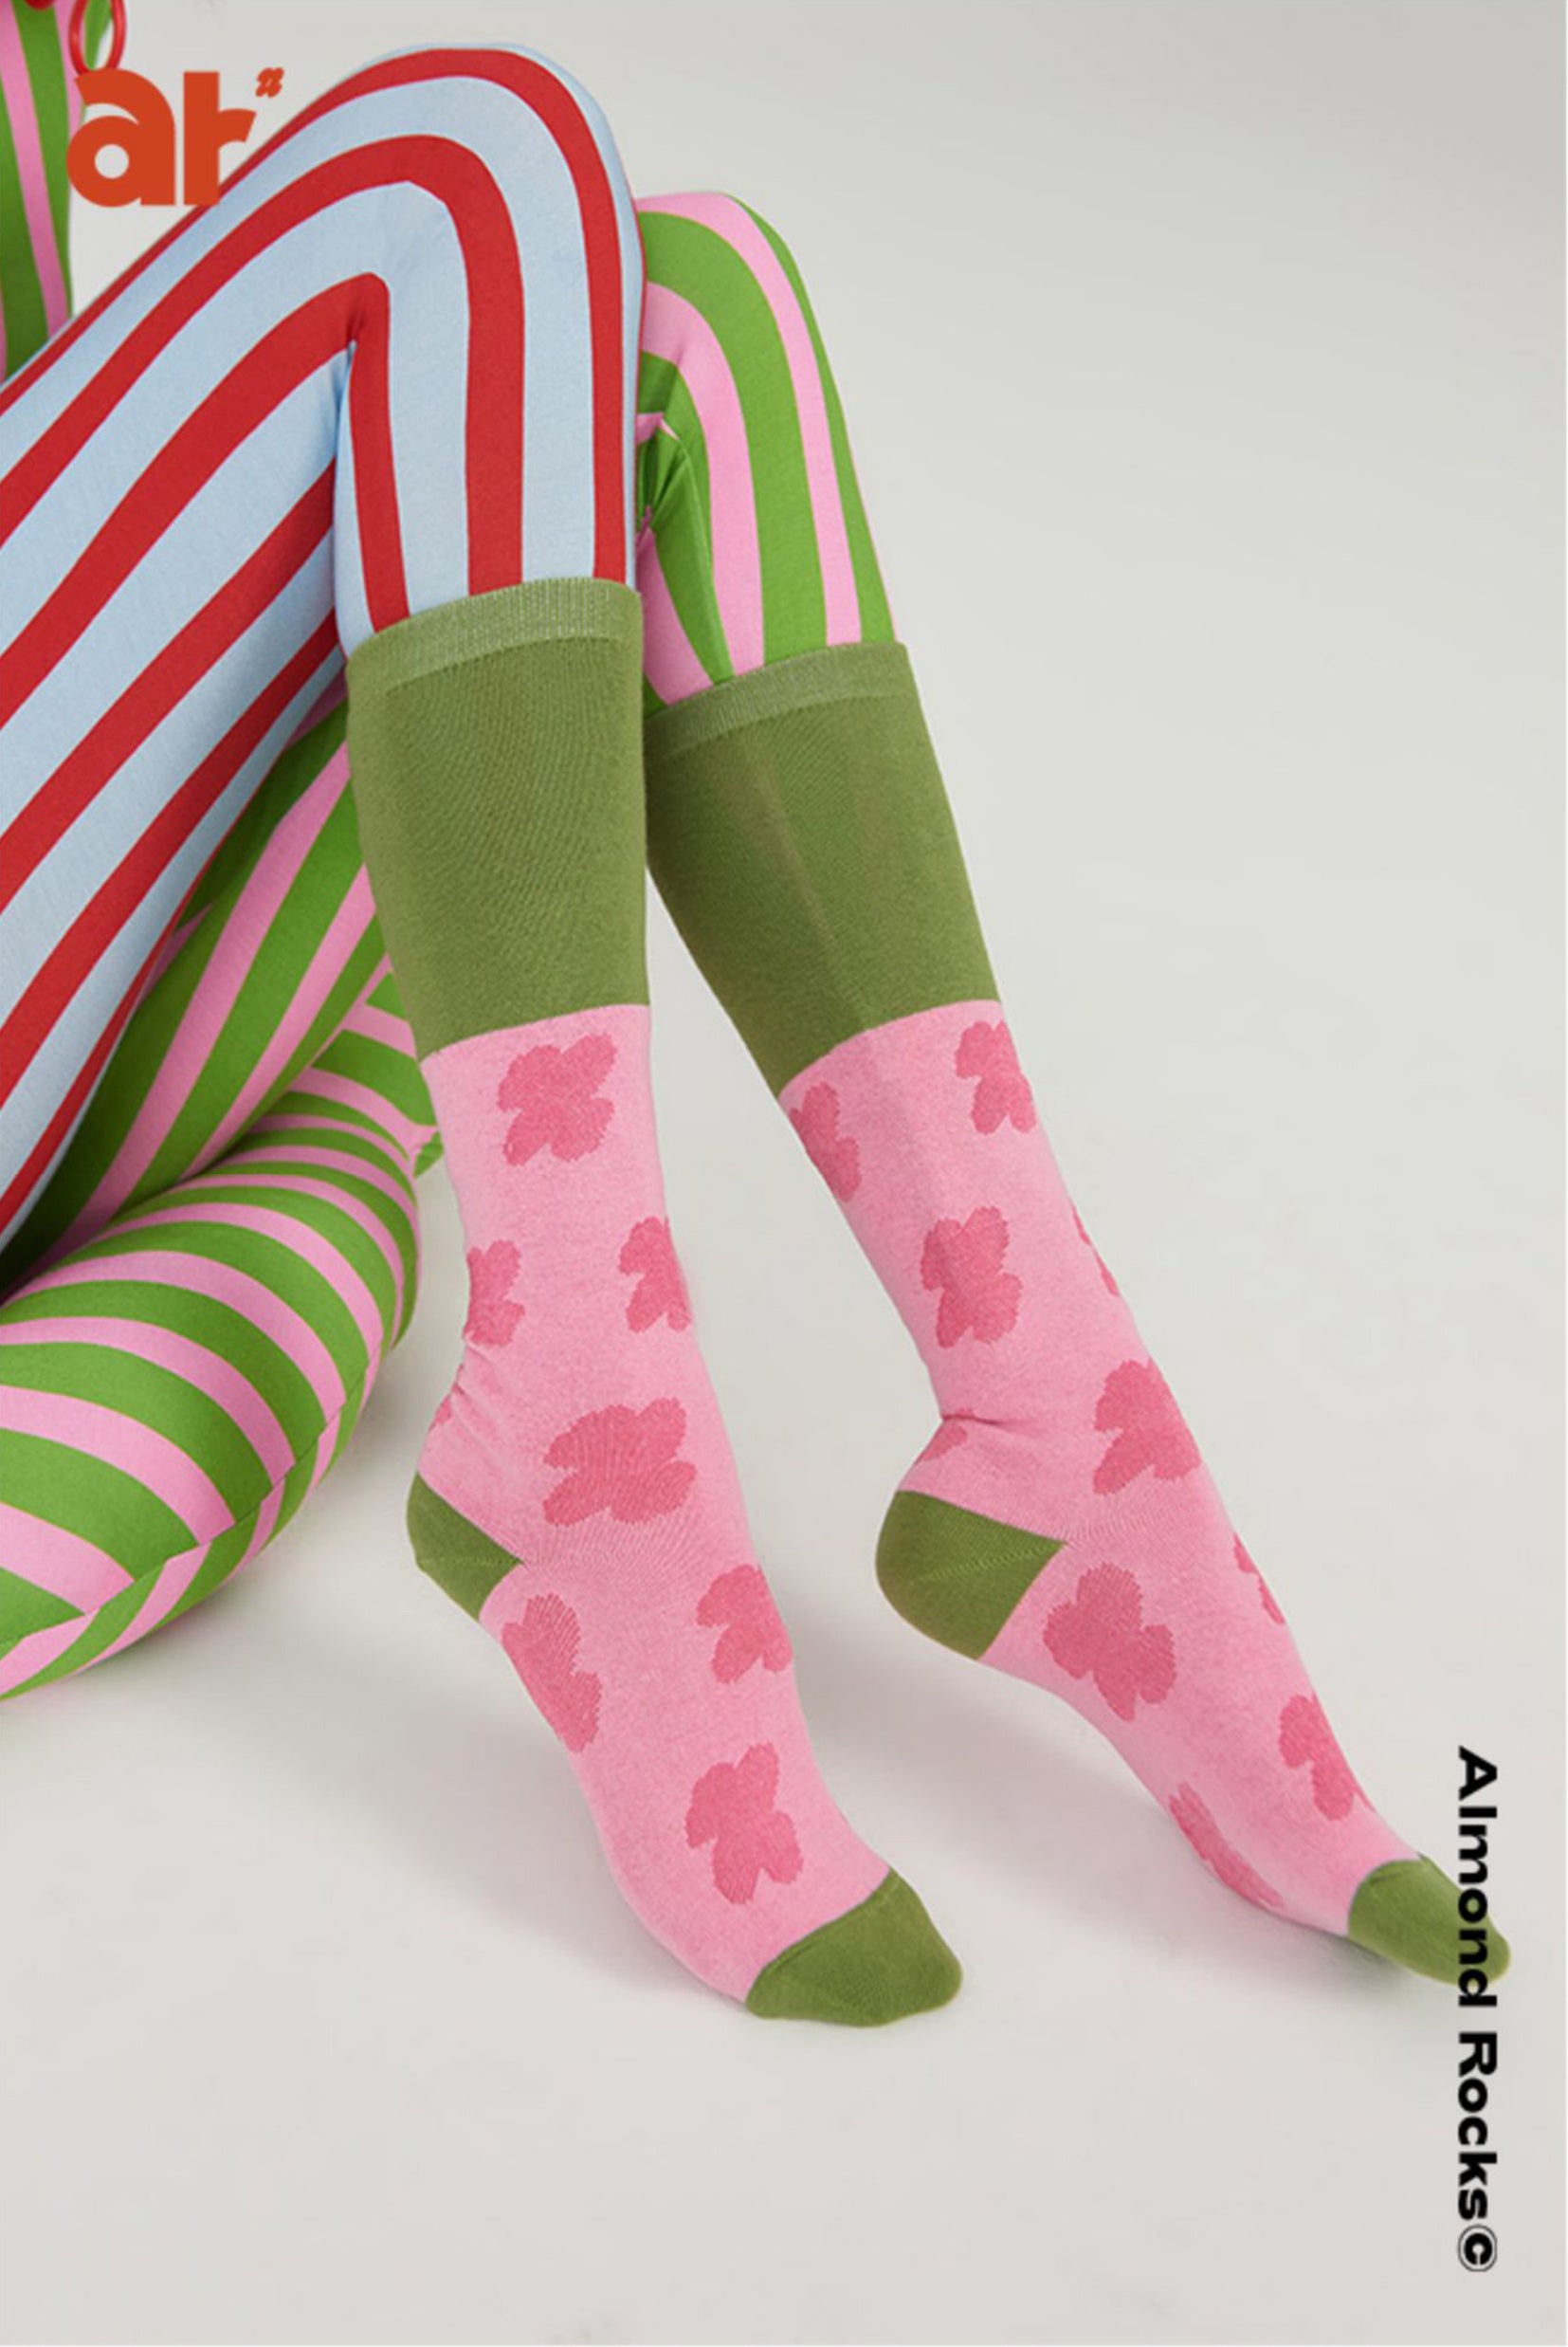 [For adults & kids] Floral splice over-the-calf sock in cherry blossom